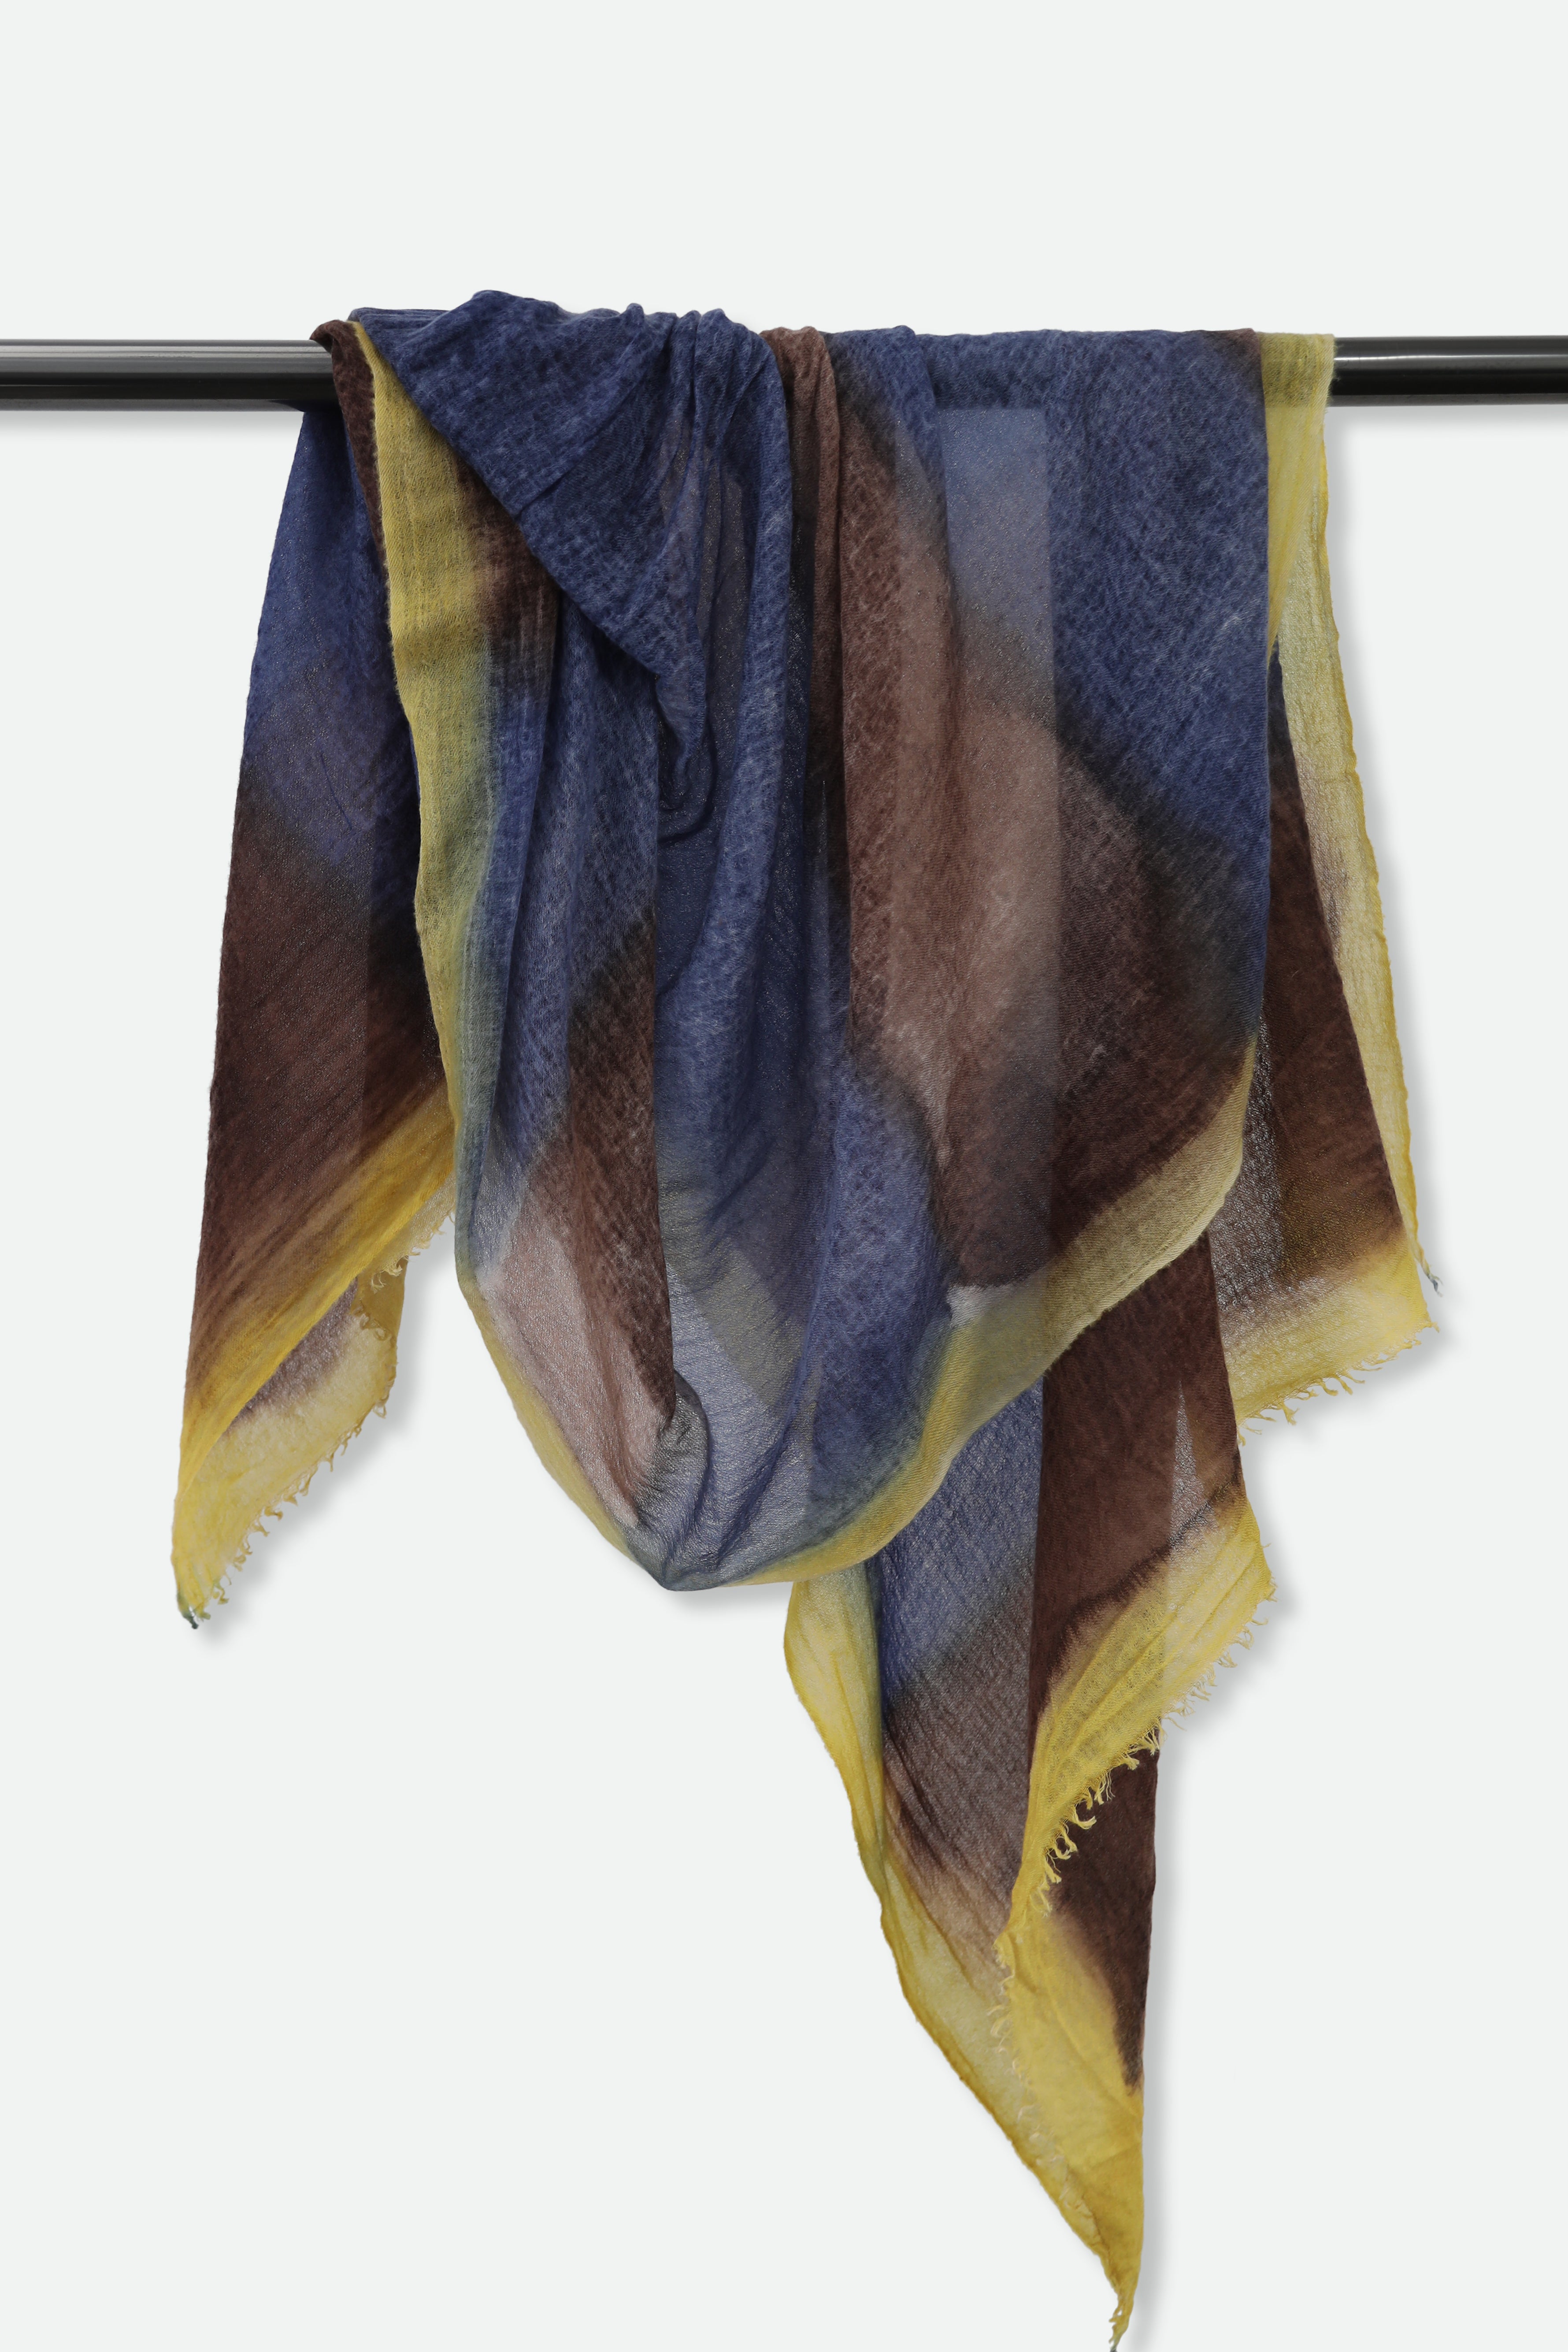 BROWN BLUE STRIPE SCARF IN HAND DYED CASHMERE